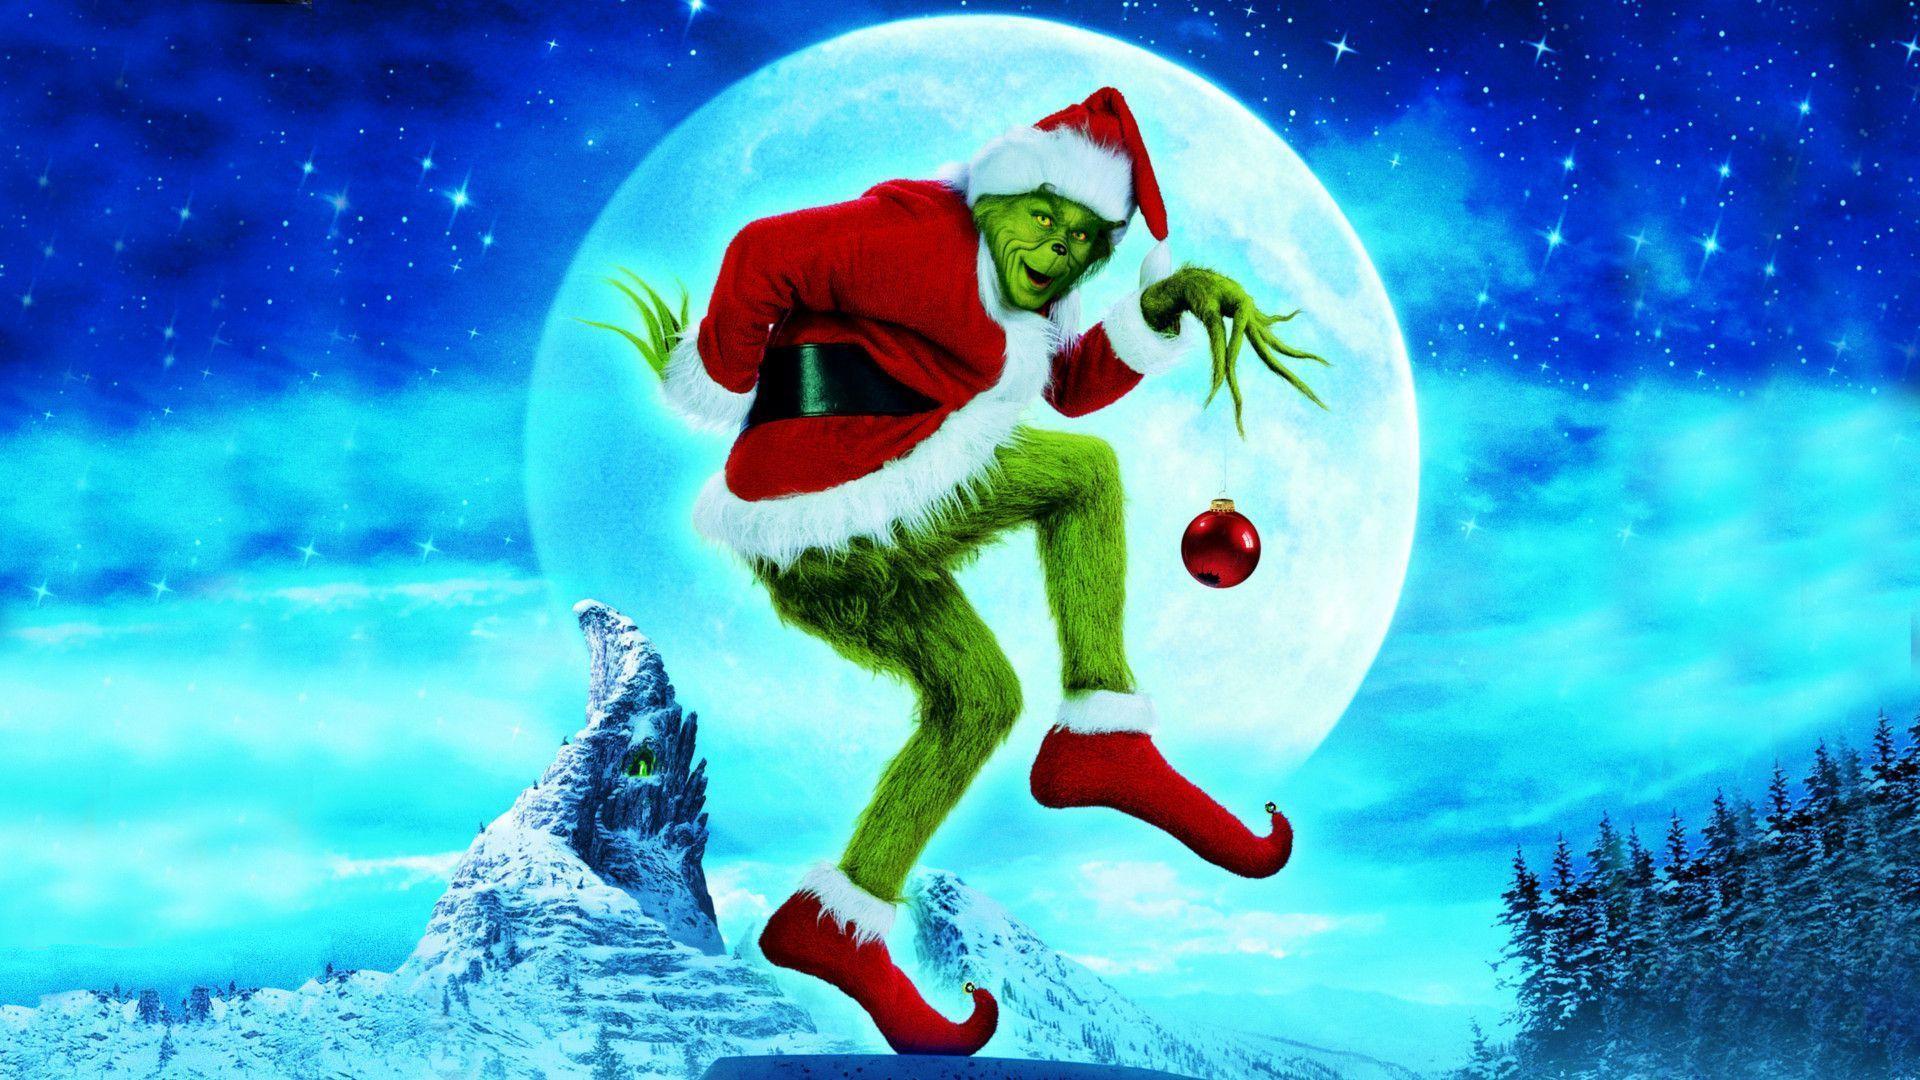 Grinch Stole Christmas Free Photo HD Wallpaper